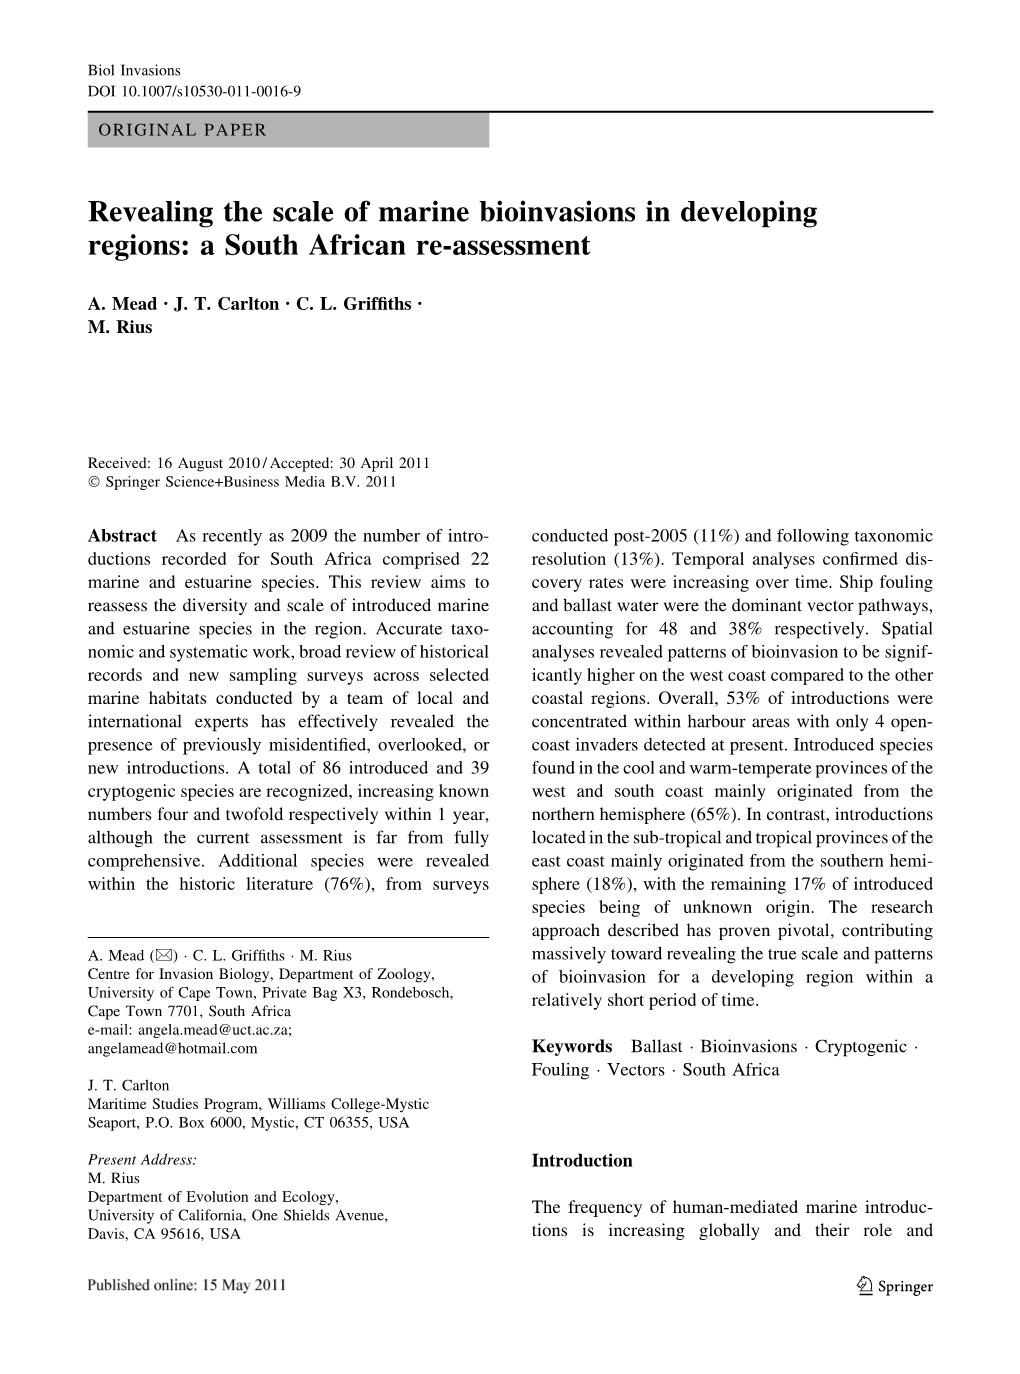 Revealing the Scale of Marine Bioinvasions in Developing Regions: a South African Re-Assessment